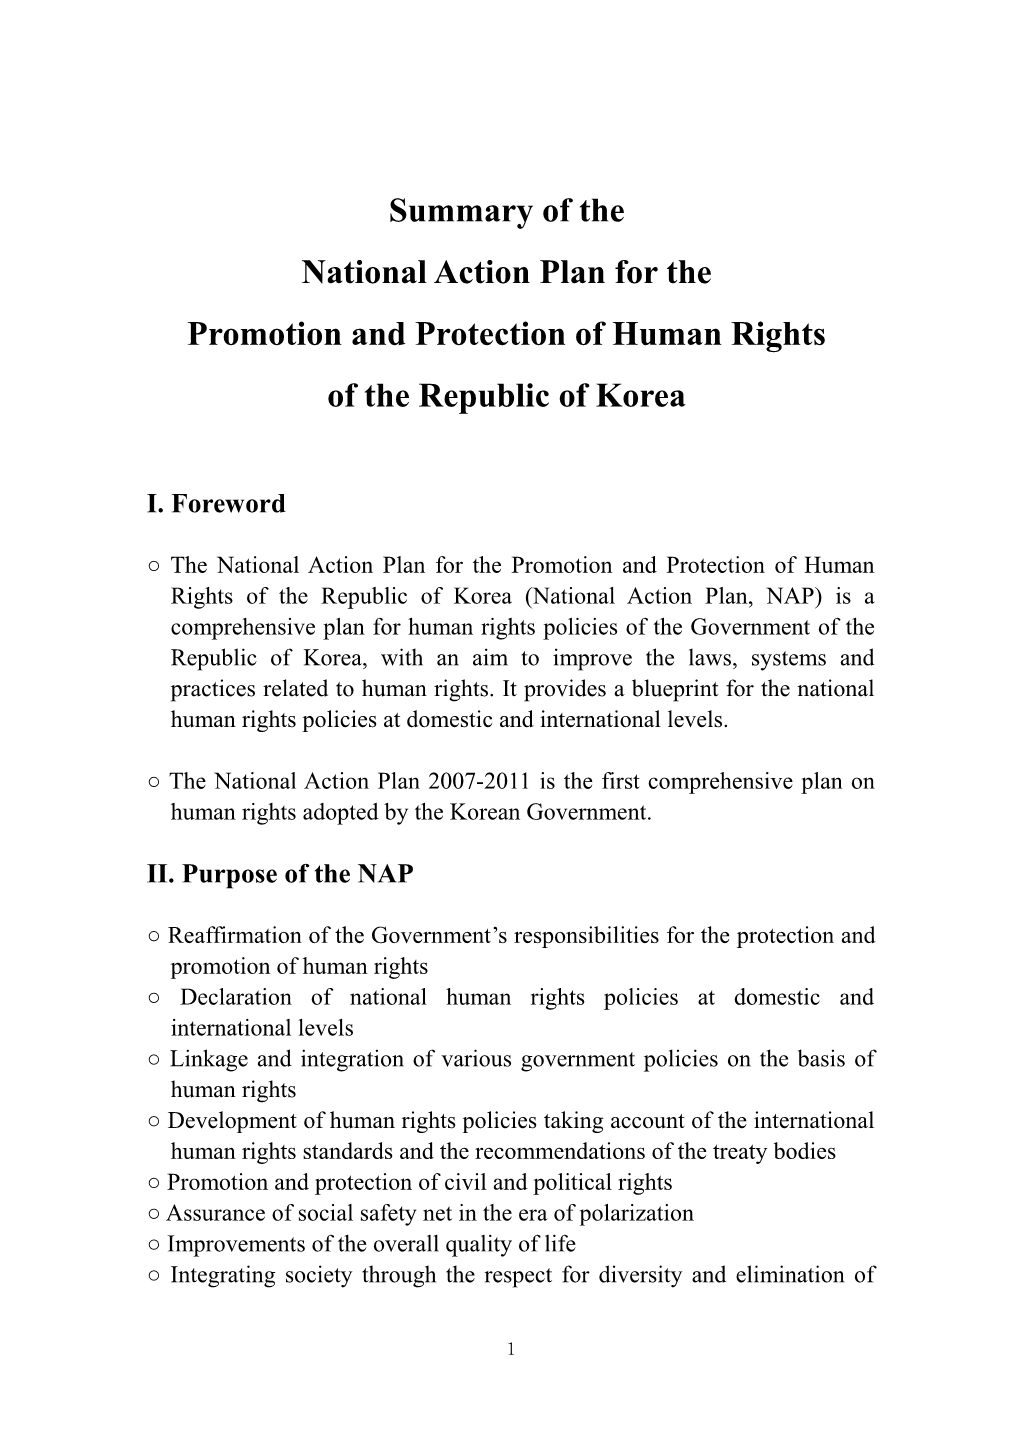 National Action Plan for the Promotion and Protection of Human Rights